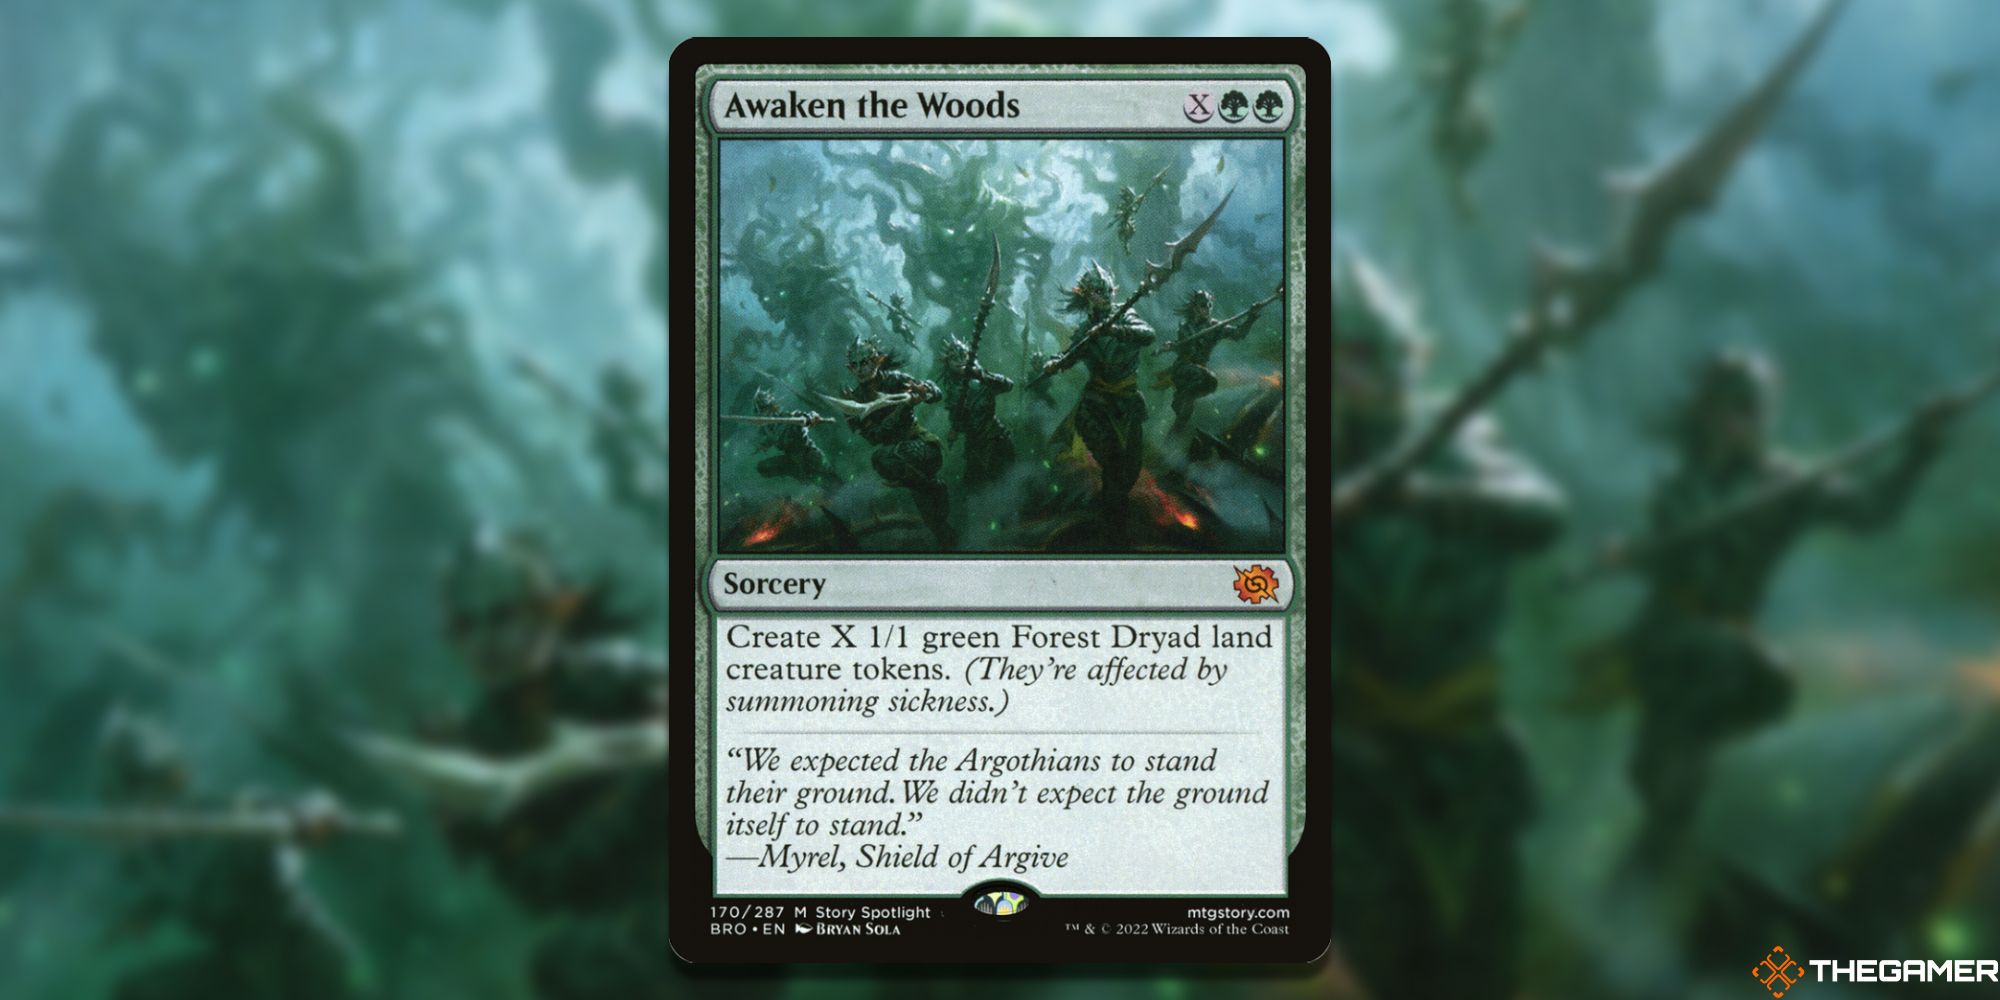 Image of the Awaken the Woods card in Magic: The Gathering, with art by Bryan Sola